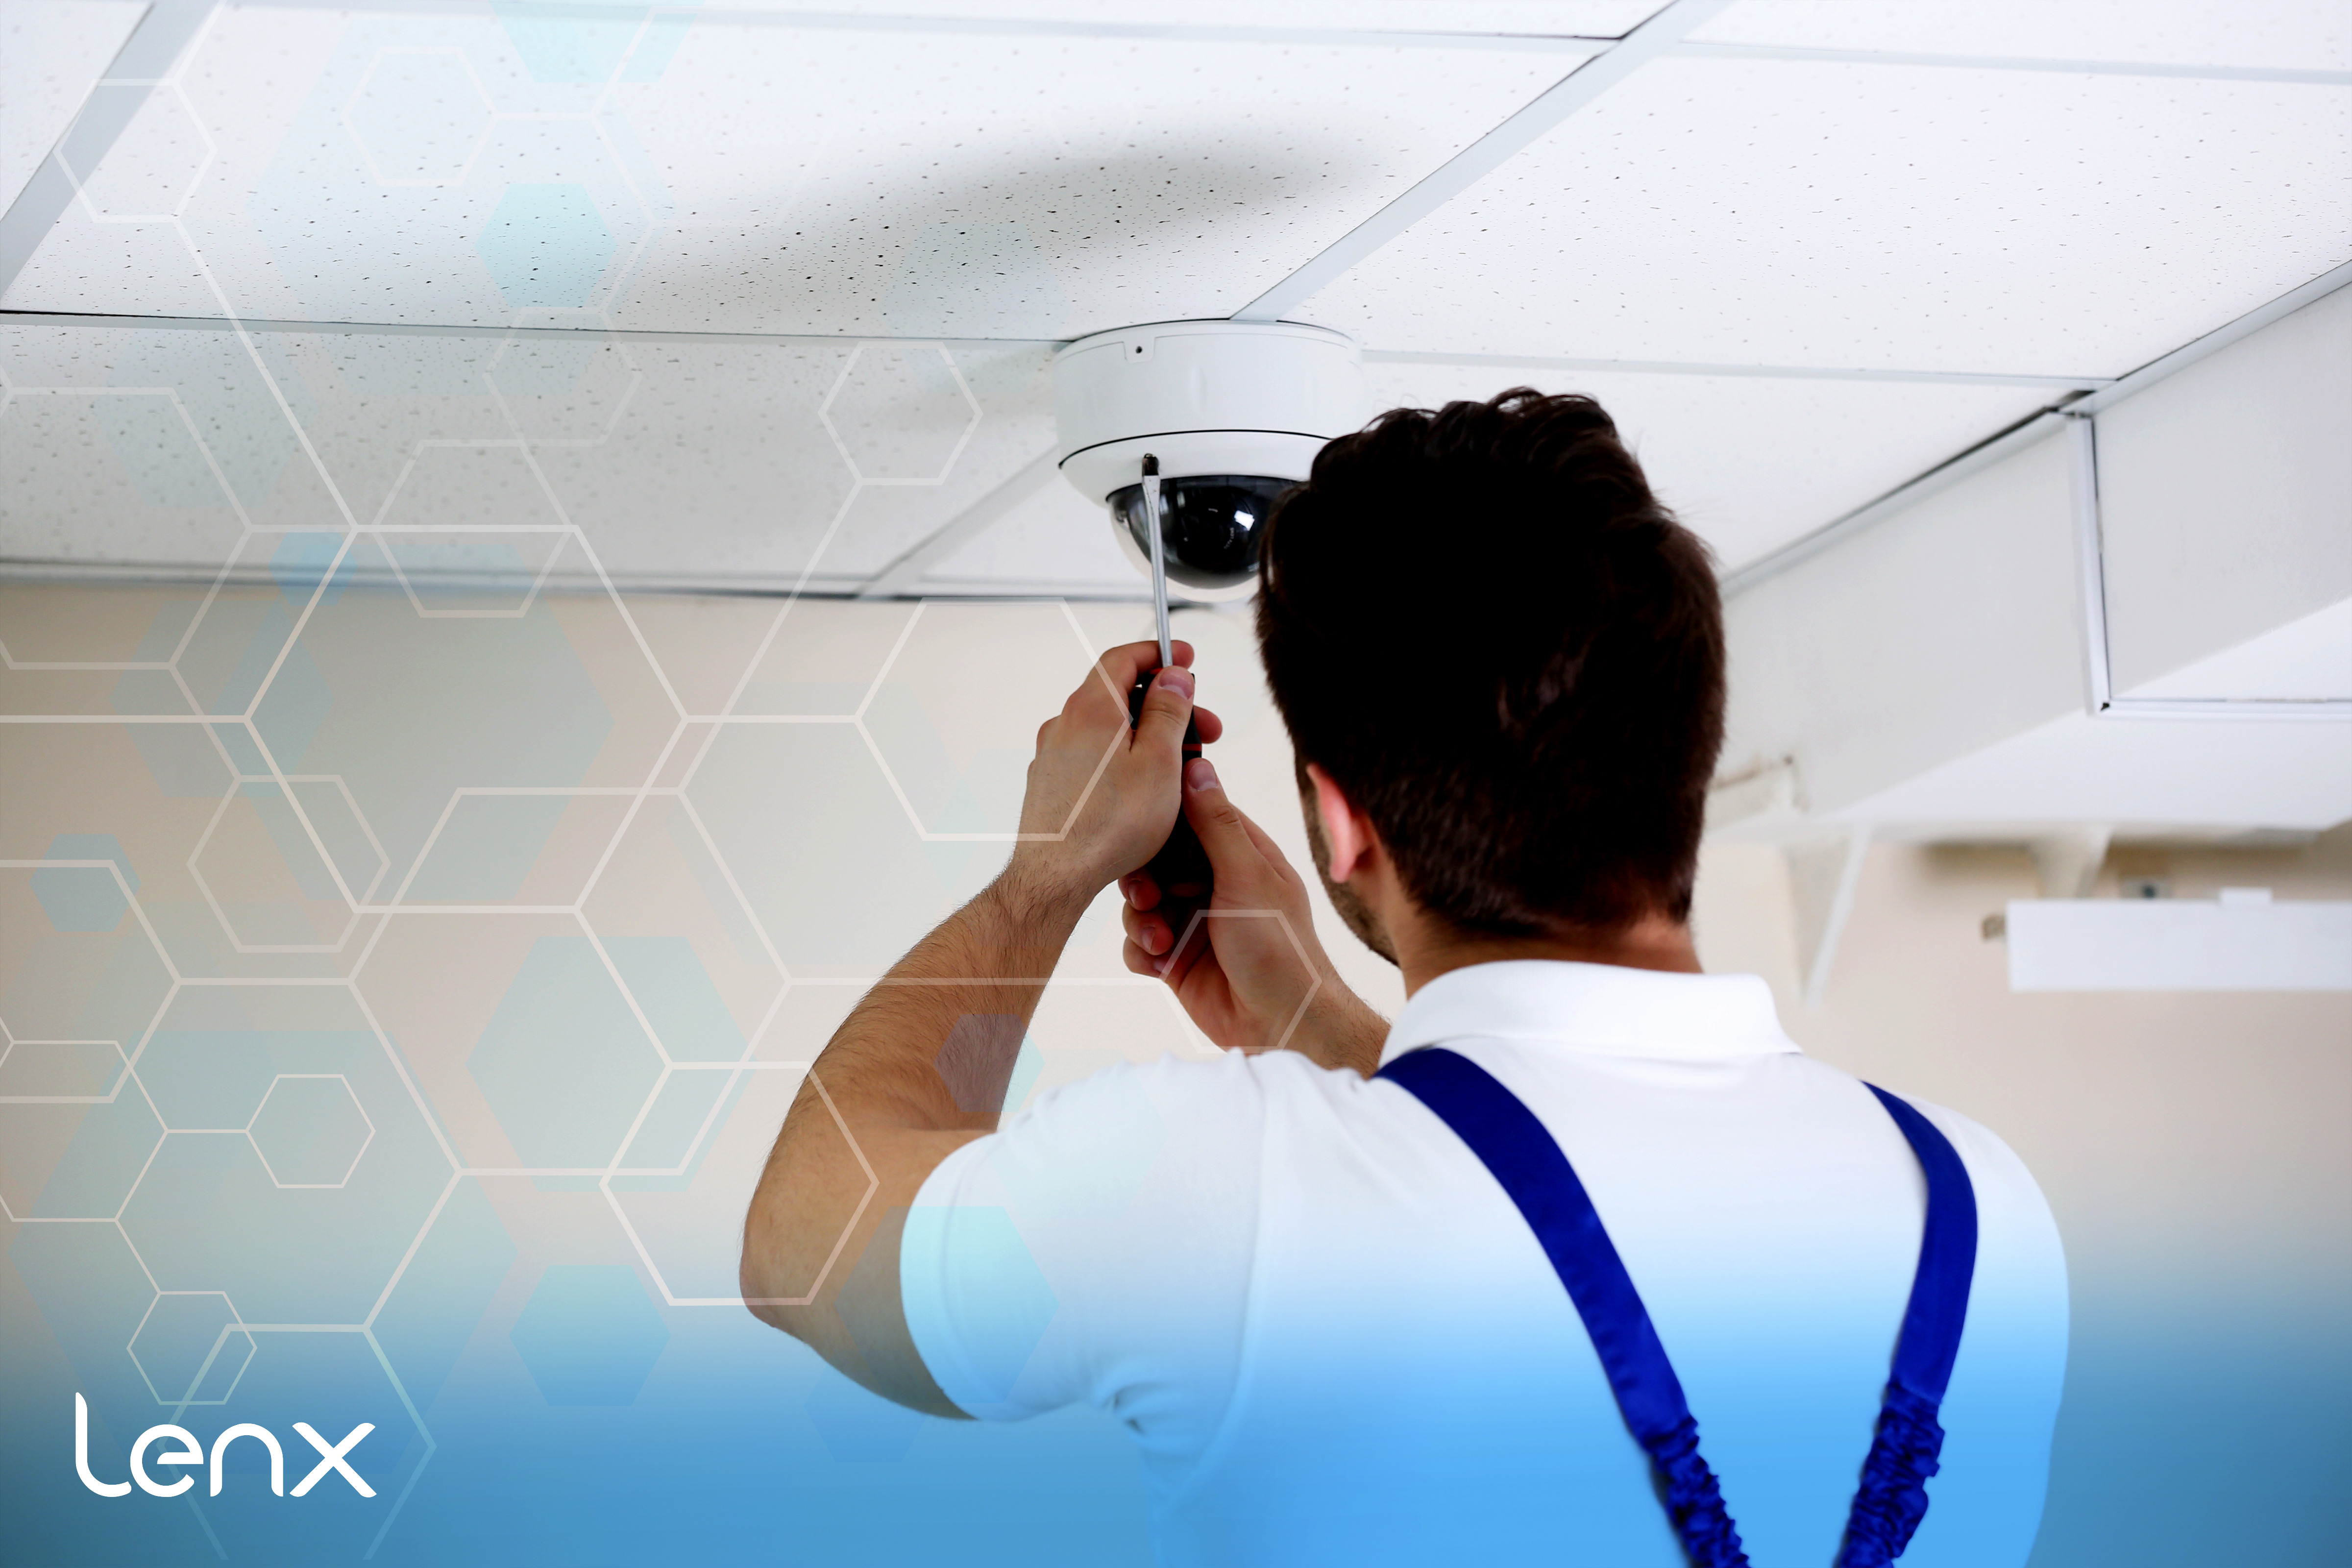 Ease of Installing LENX AI Security and Active Shooter Detection Systems